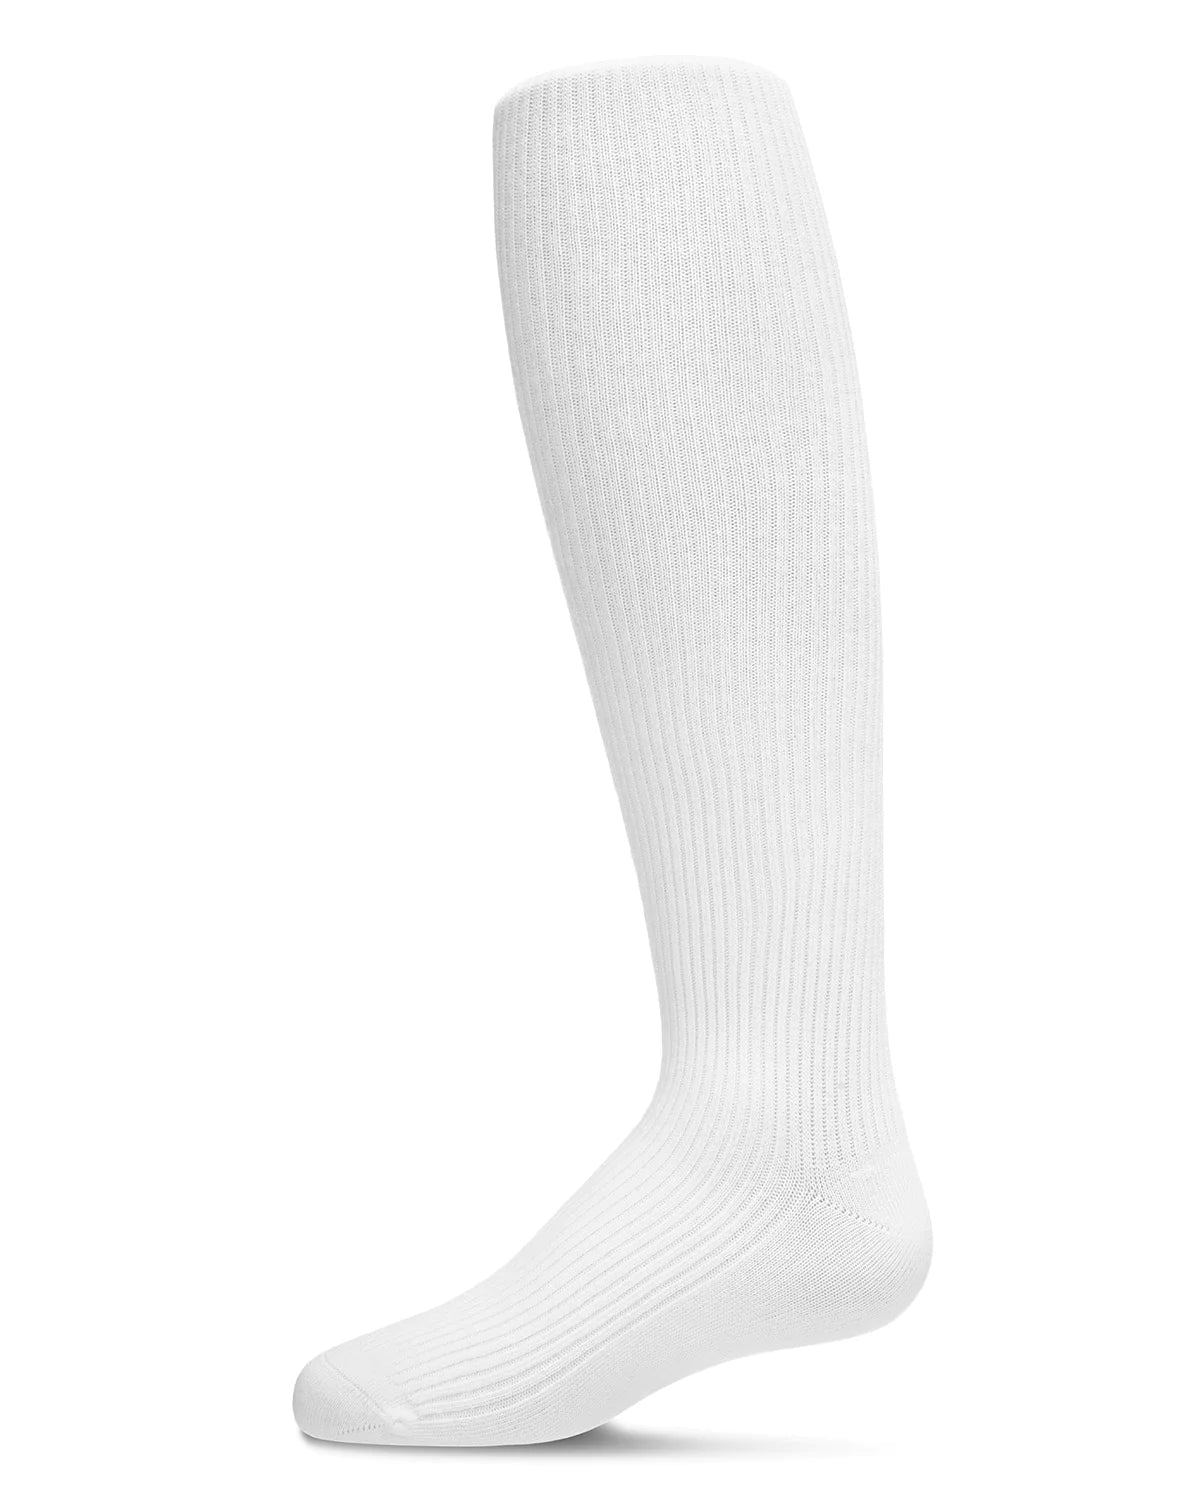 Winter White Infant Thin Ribbed Cotton Blend Basic Non-Binding Tights